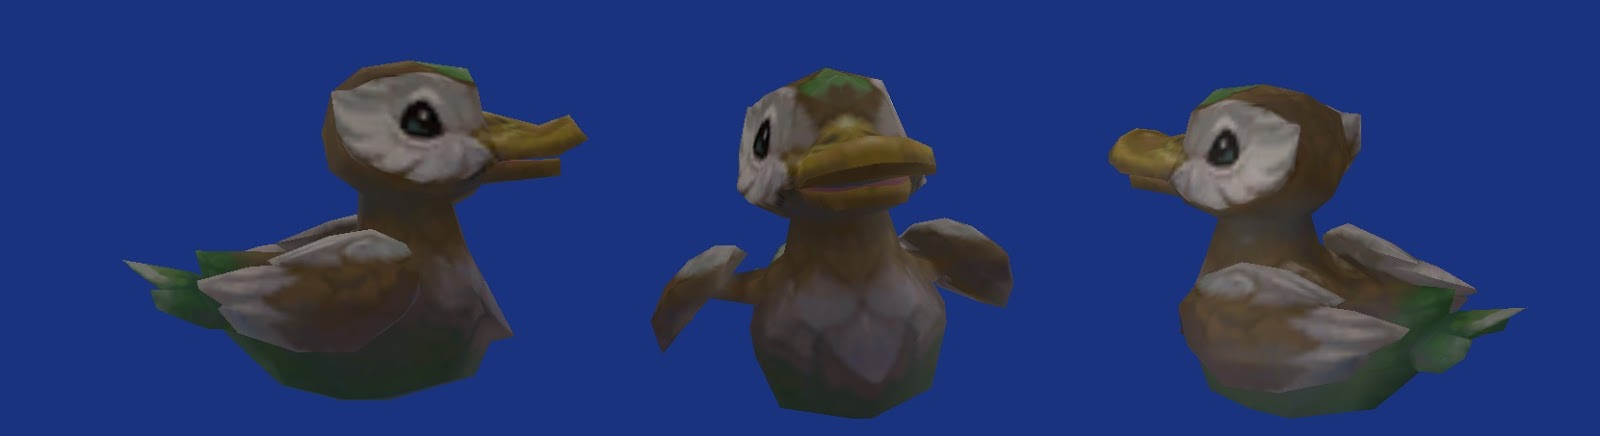 Lesser-Spotted Duck Elusive To Players Of League Of Legends